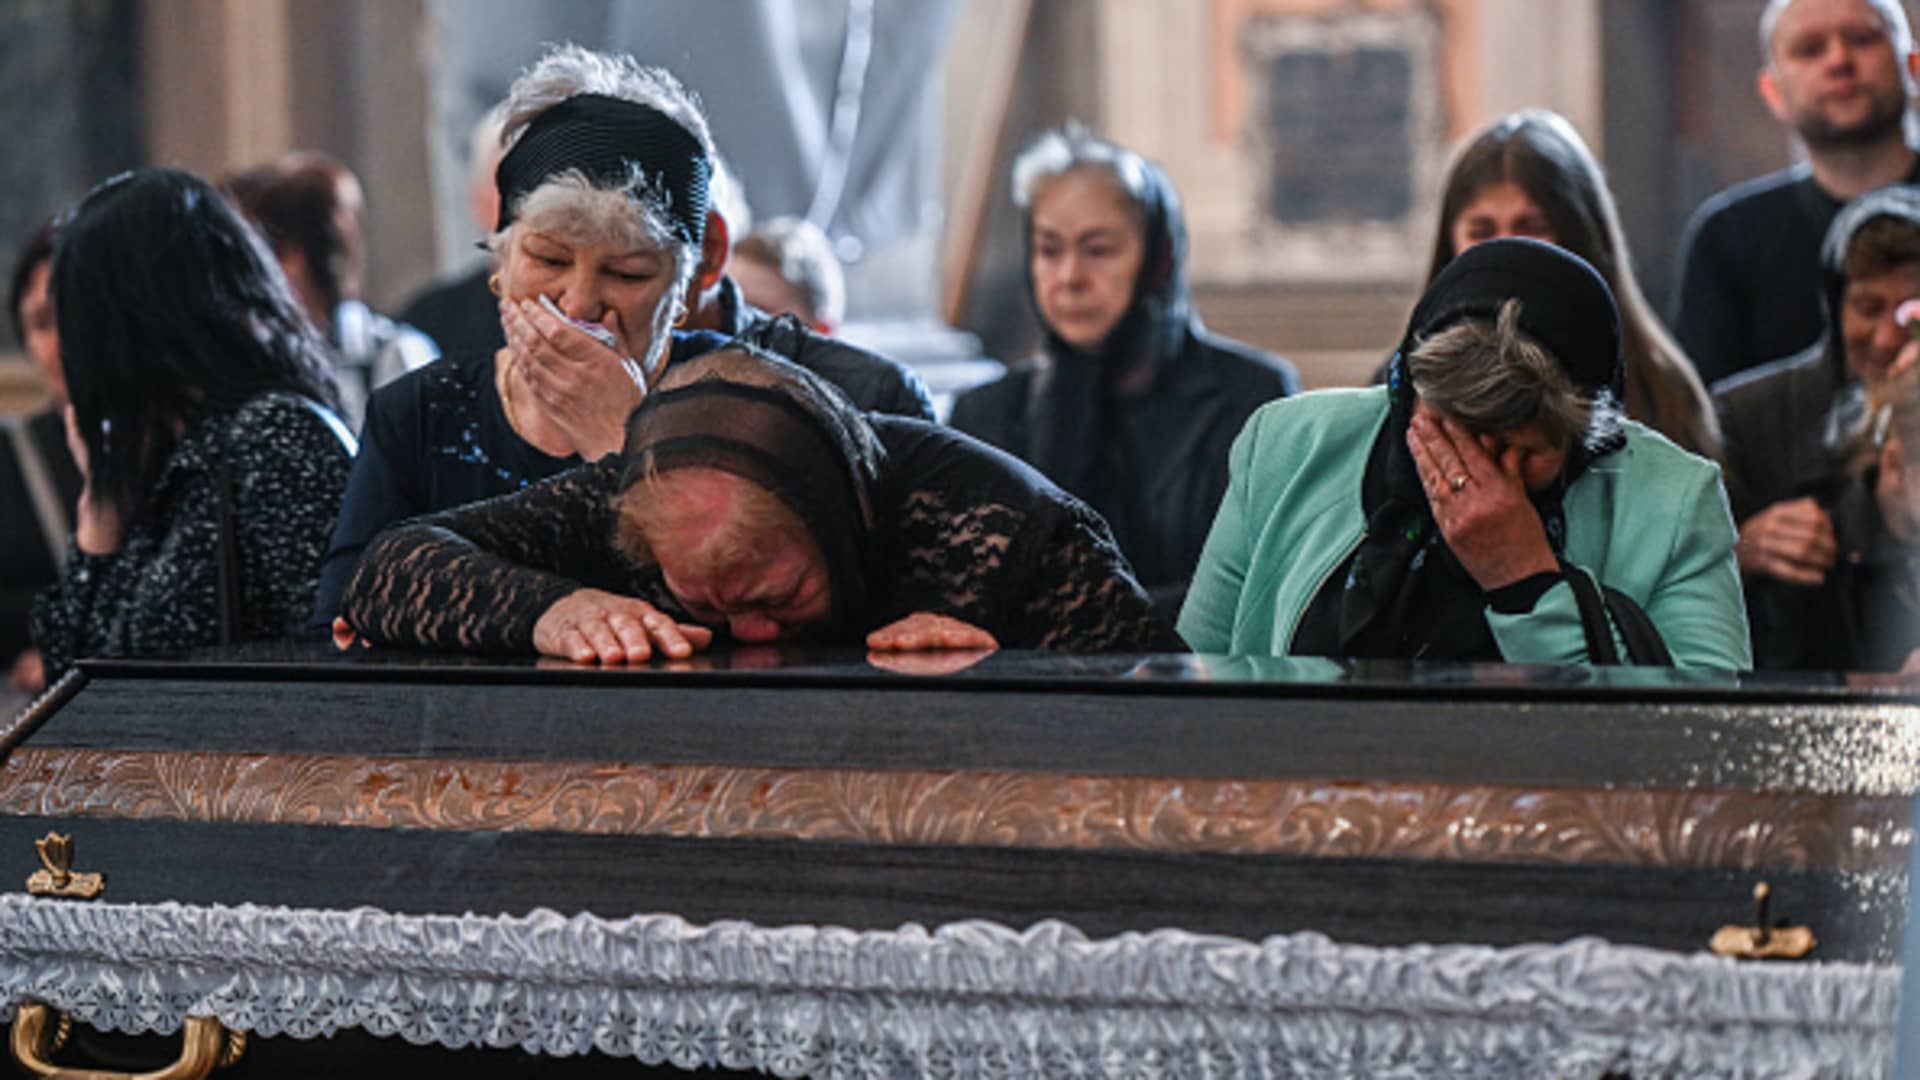 Relatives cry by the coffin of the Ukrainian fallen soldier Yurii Huk, age 41 at the Church of the Most Holy Apostles Peter and Paul in Lviv, Ukraine on May 16, 2022.